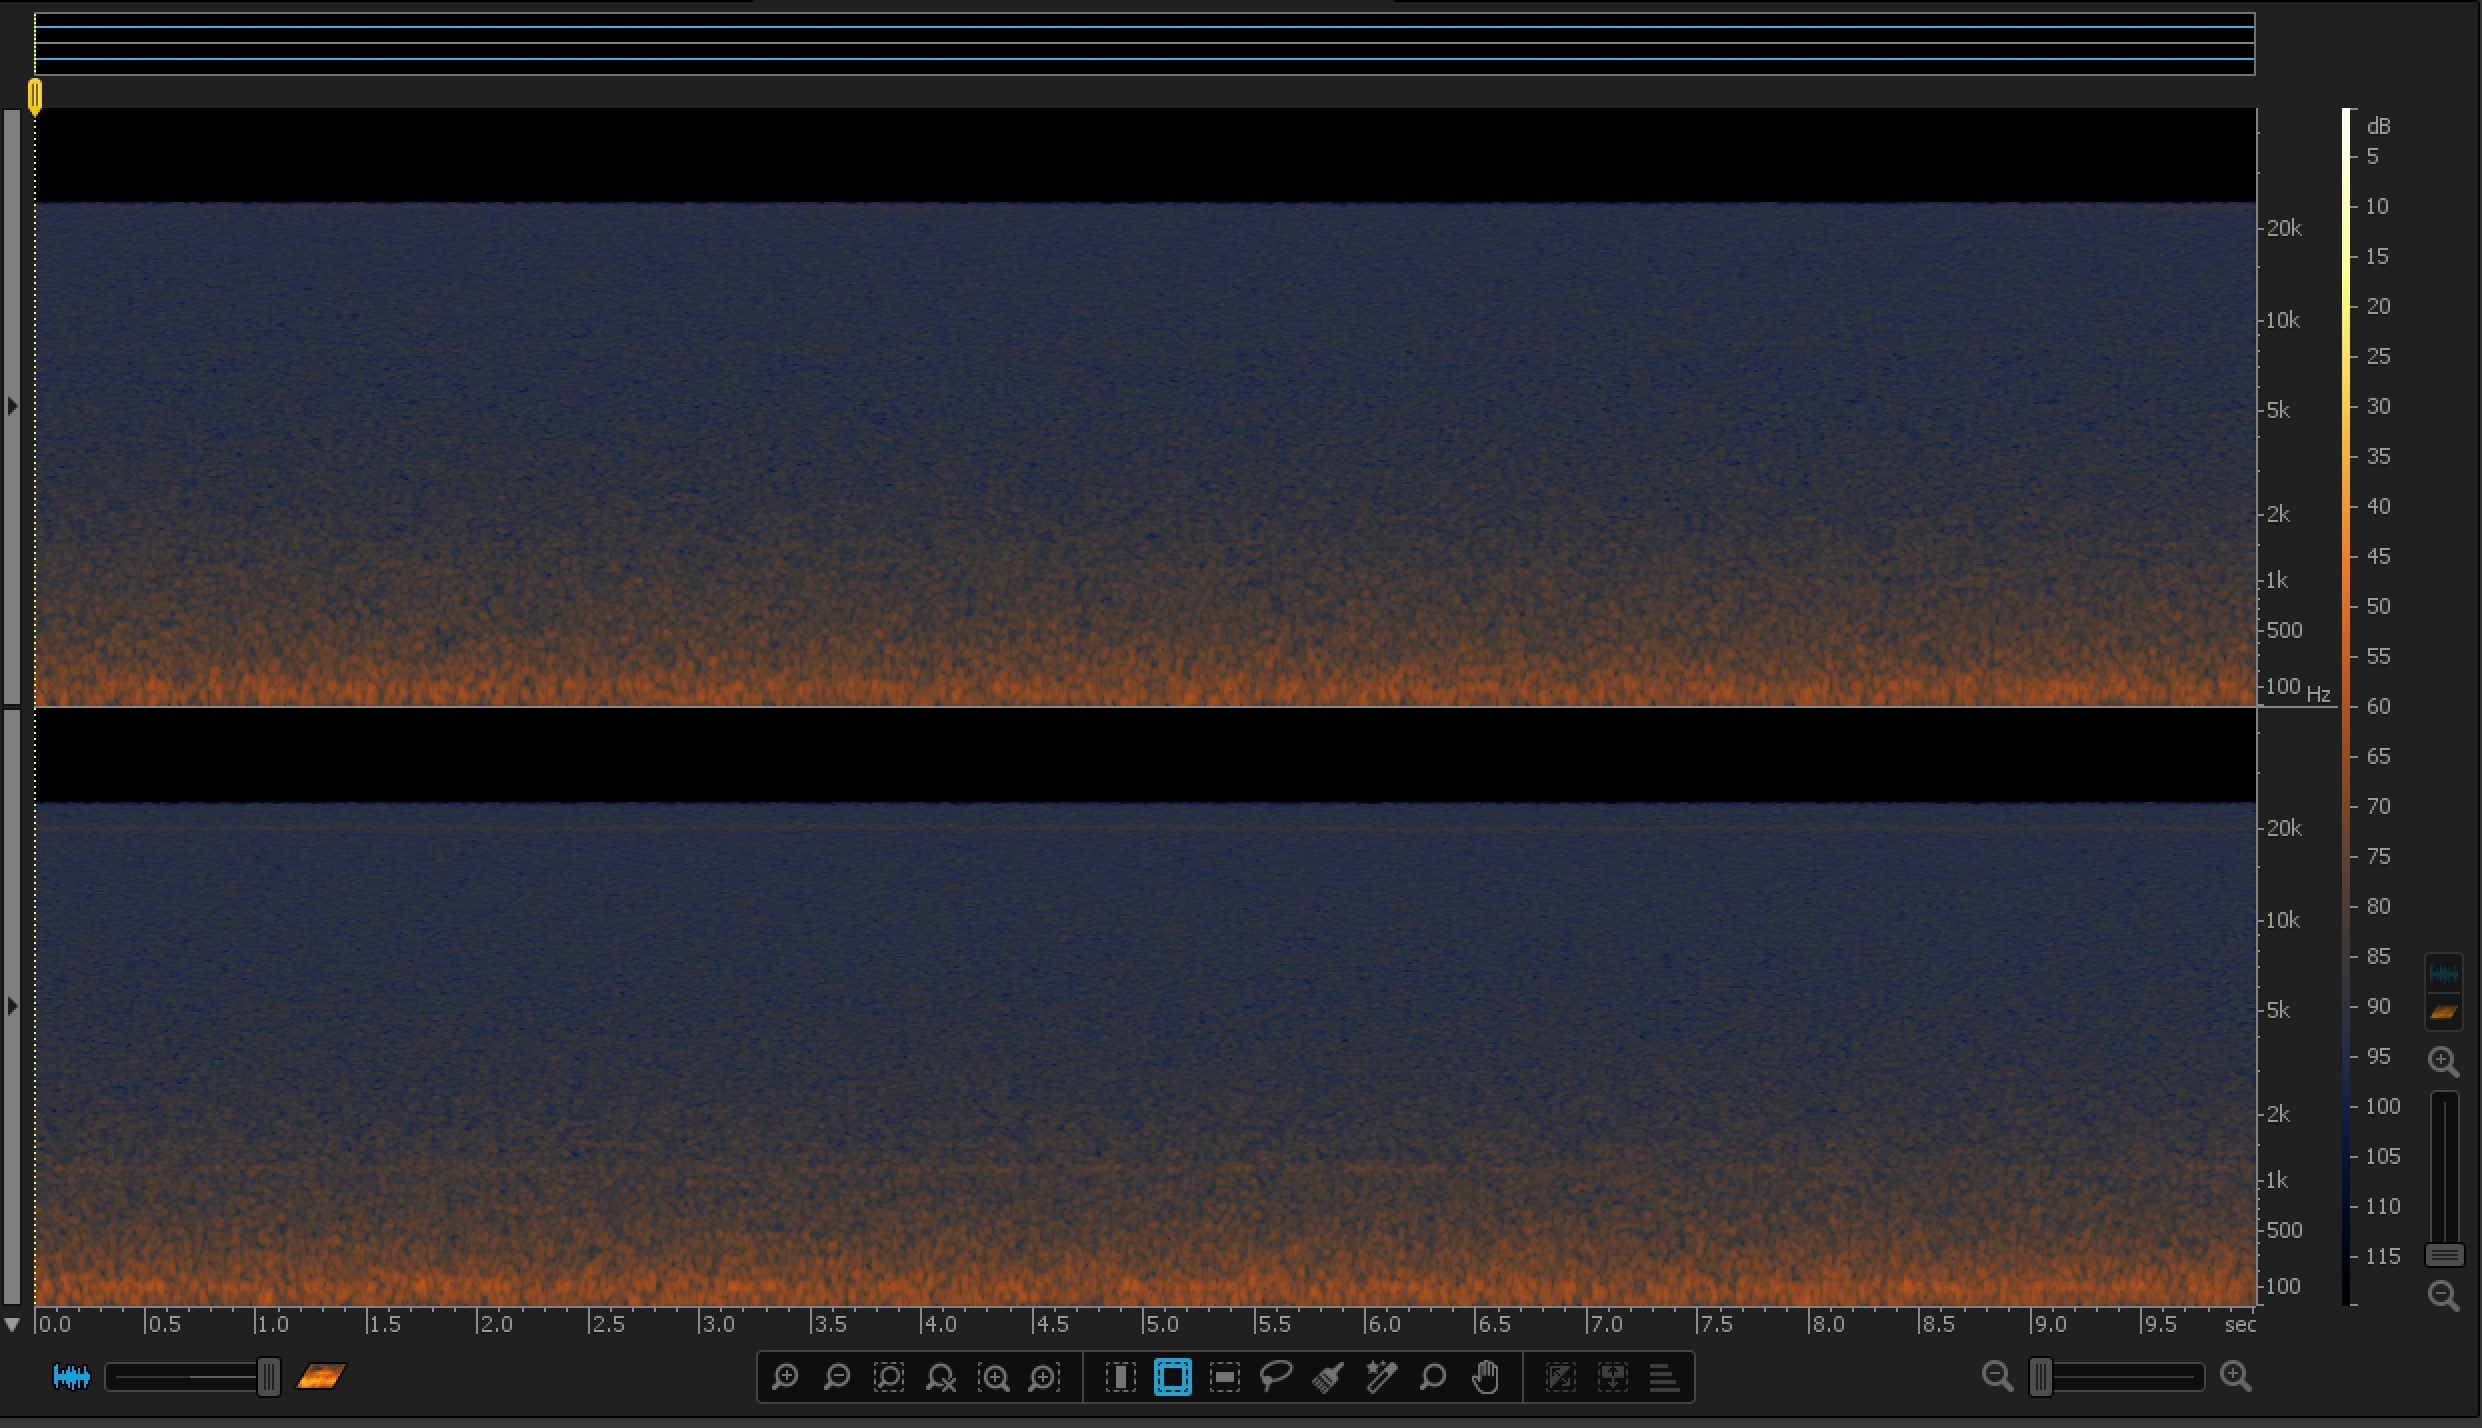 H2n Noise Spectrogram (Source: iZotope RX 4)